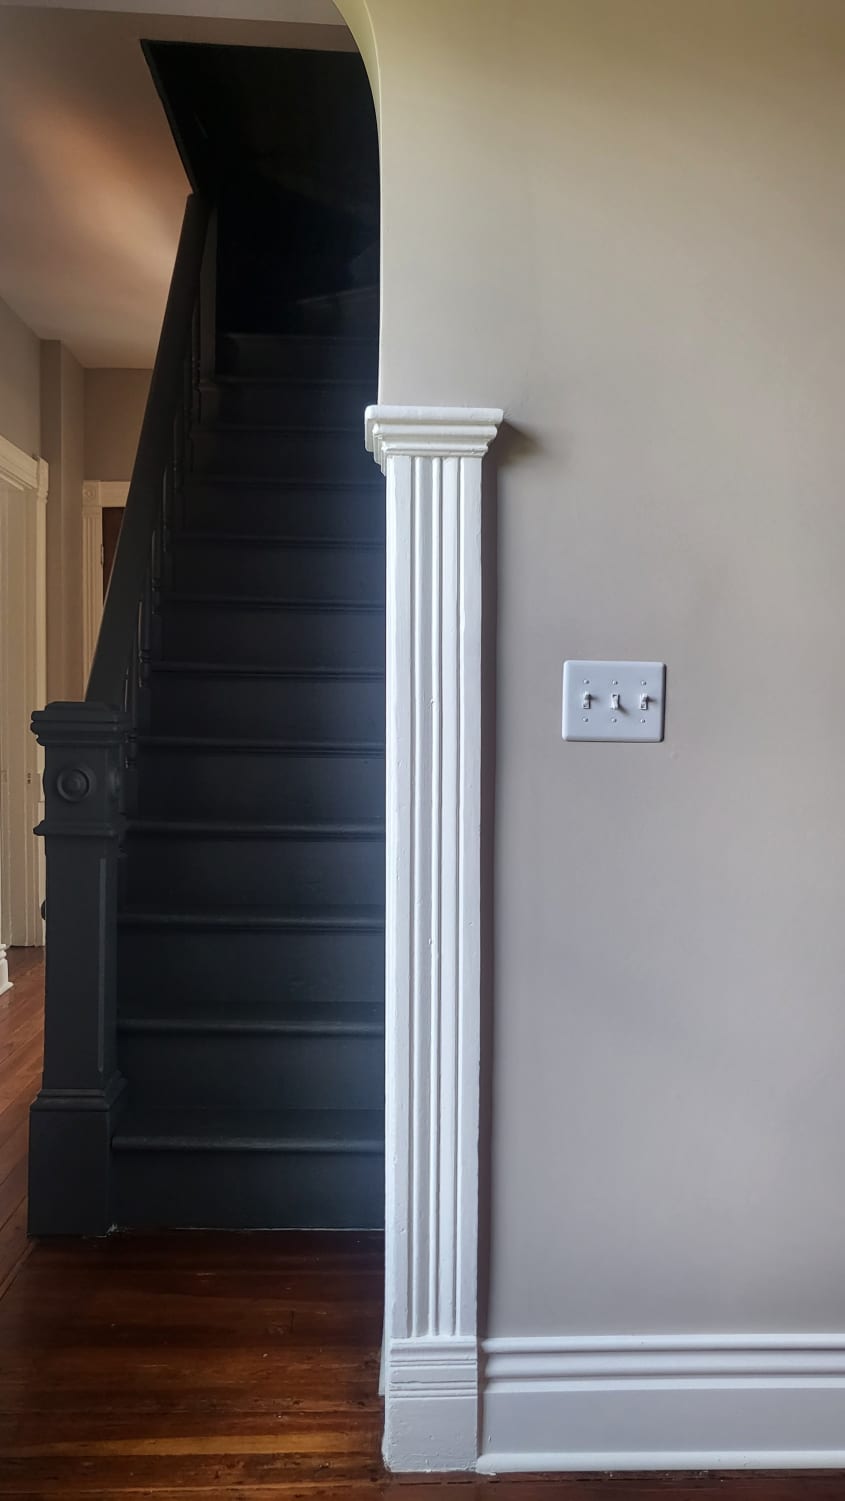 View of stairs that shows a beige-painted wall with a white light switch plate